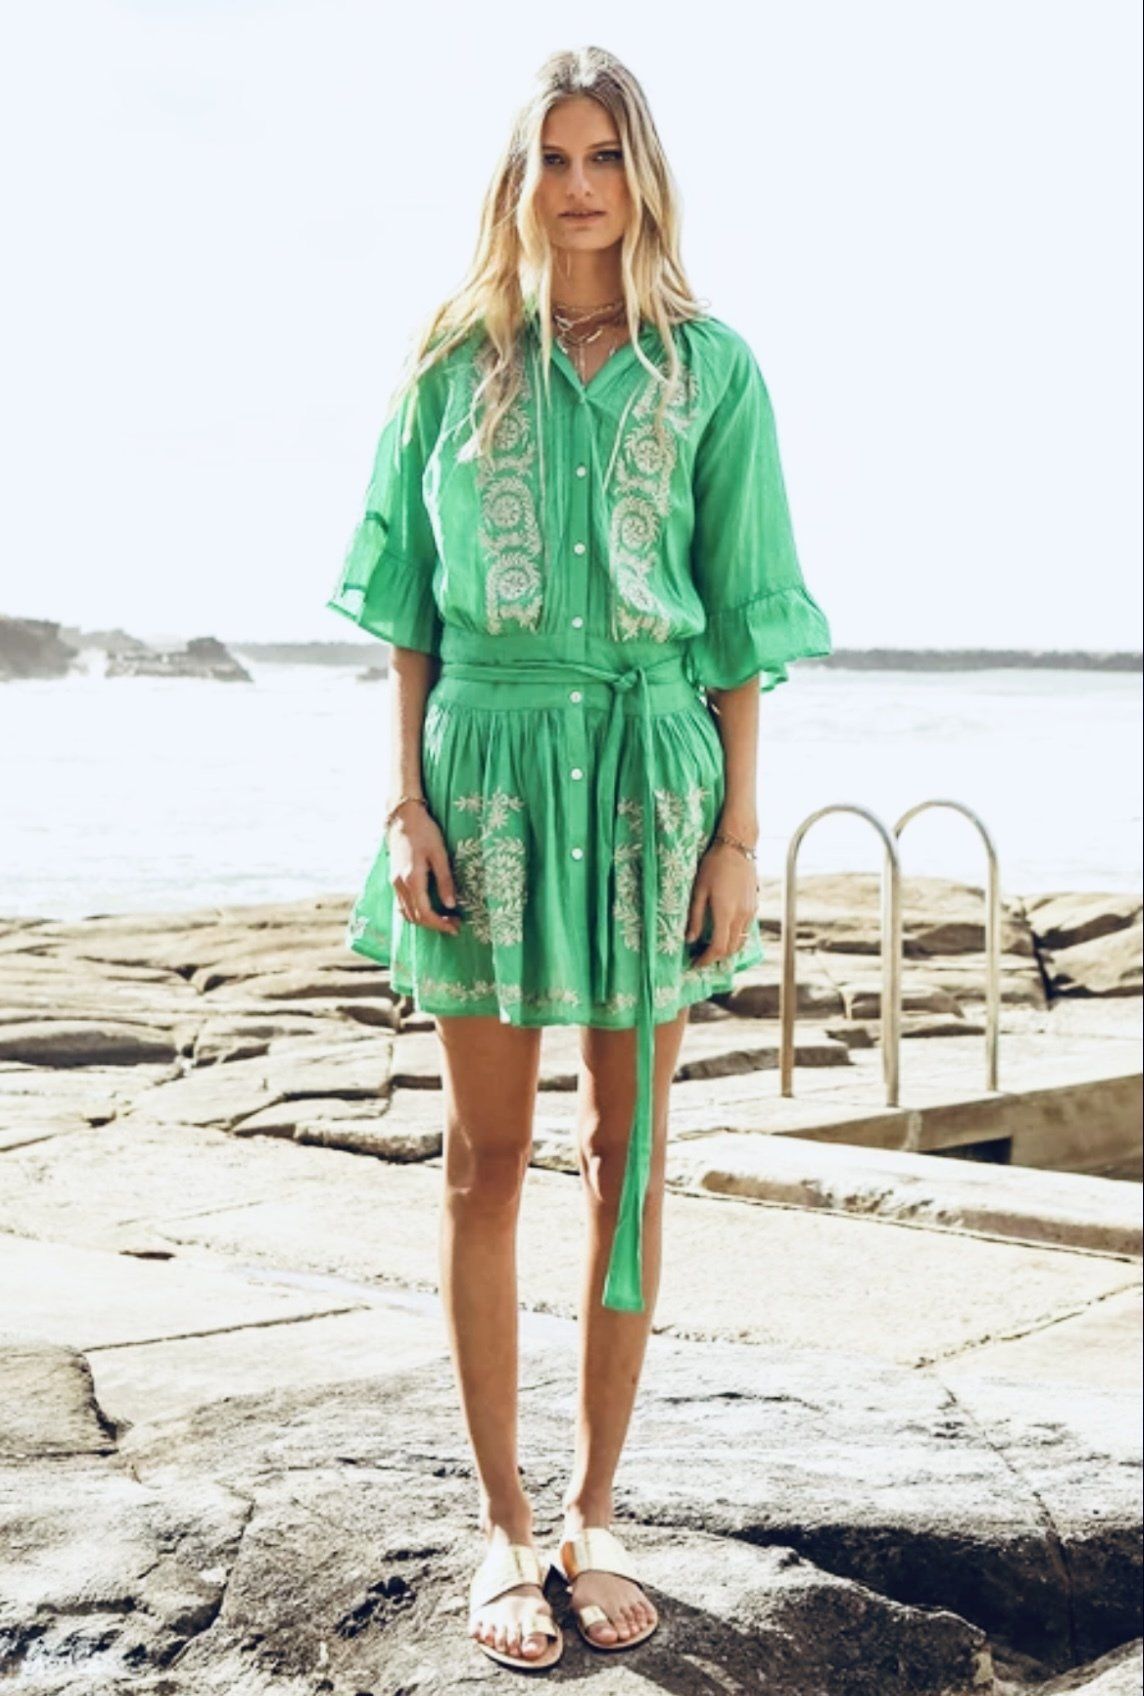 Green Dress with Standing Blonde Model   — Boutique in Sippy Downs, QLD